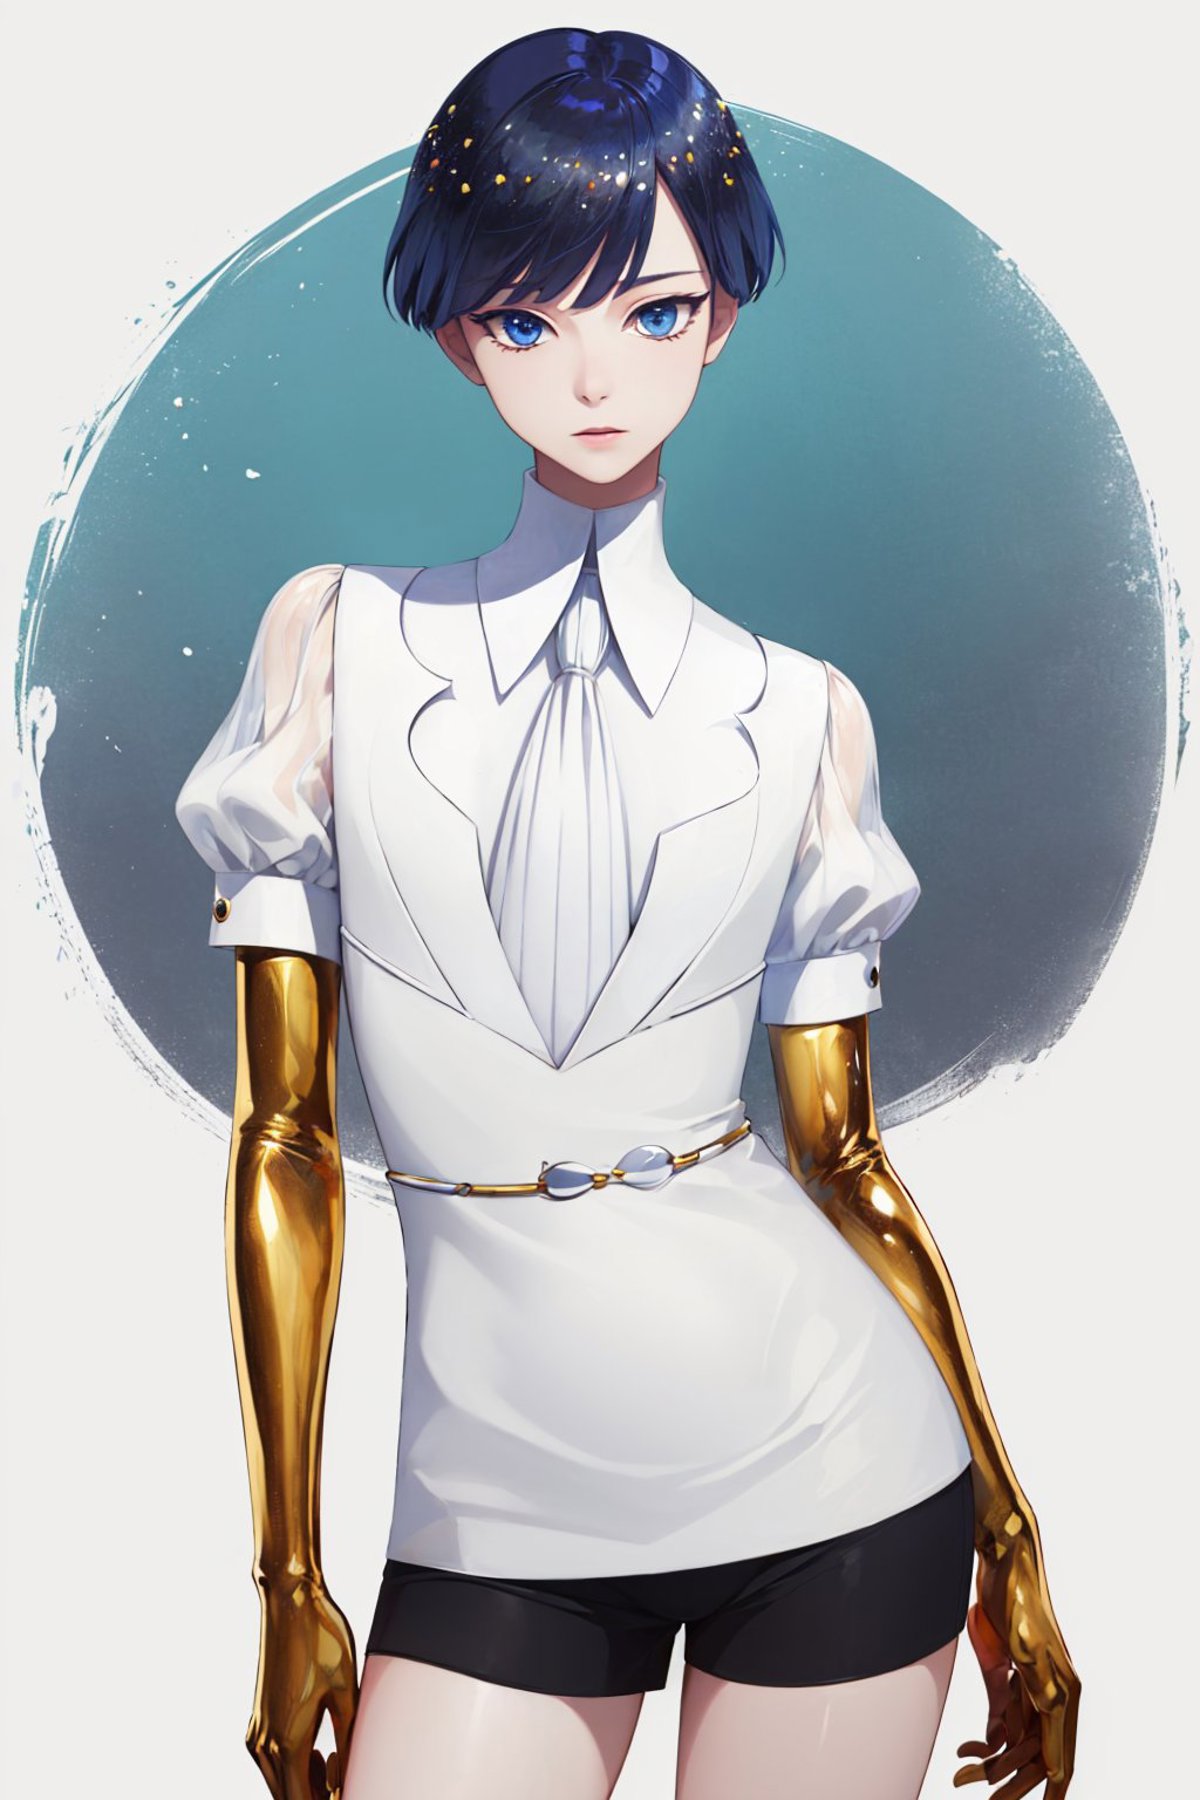 Phosphophyllite (LL) | Land of the Lustrous image by justTNP